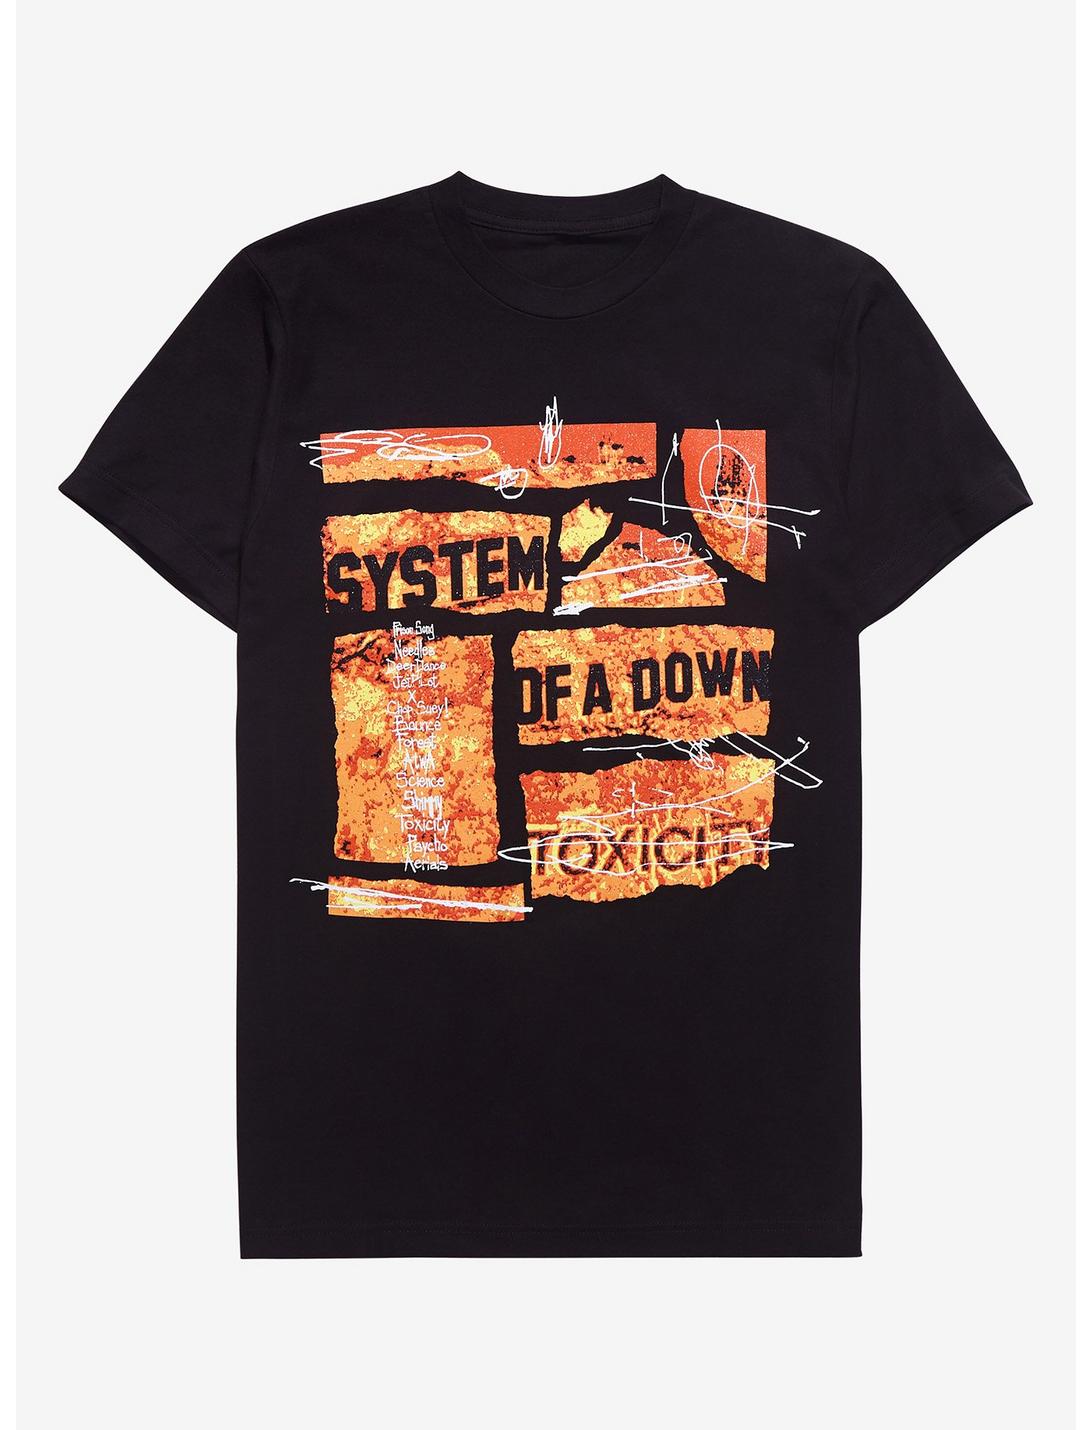 System Of A Down Toxicity Collage Girls T-Shirt, BLACK, hi-res